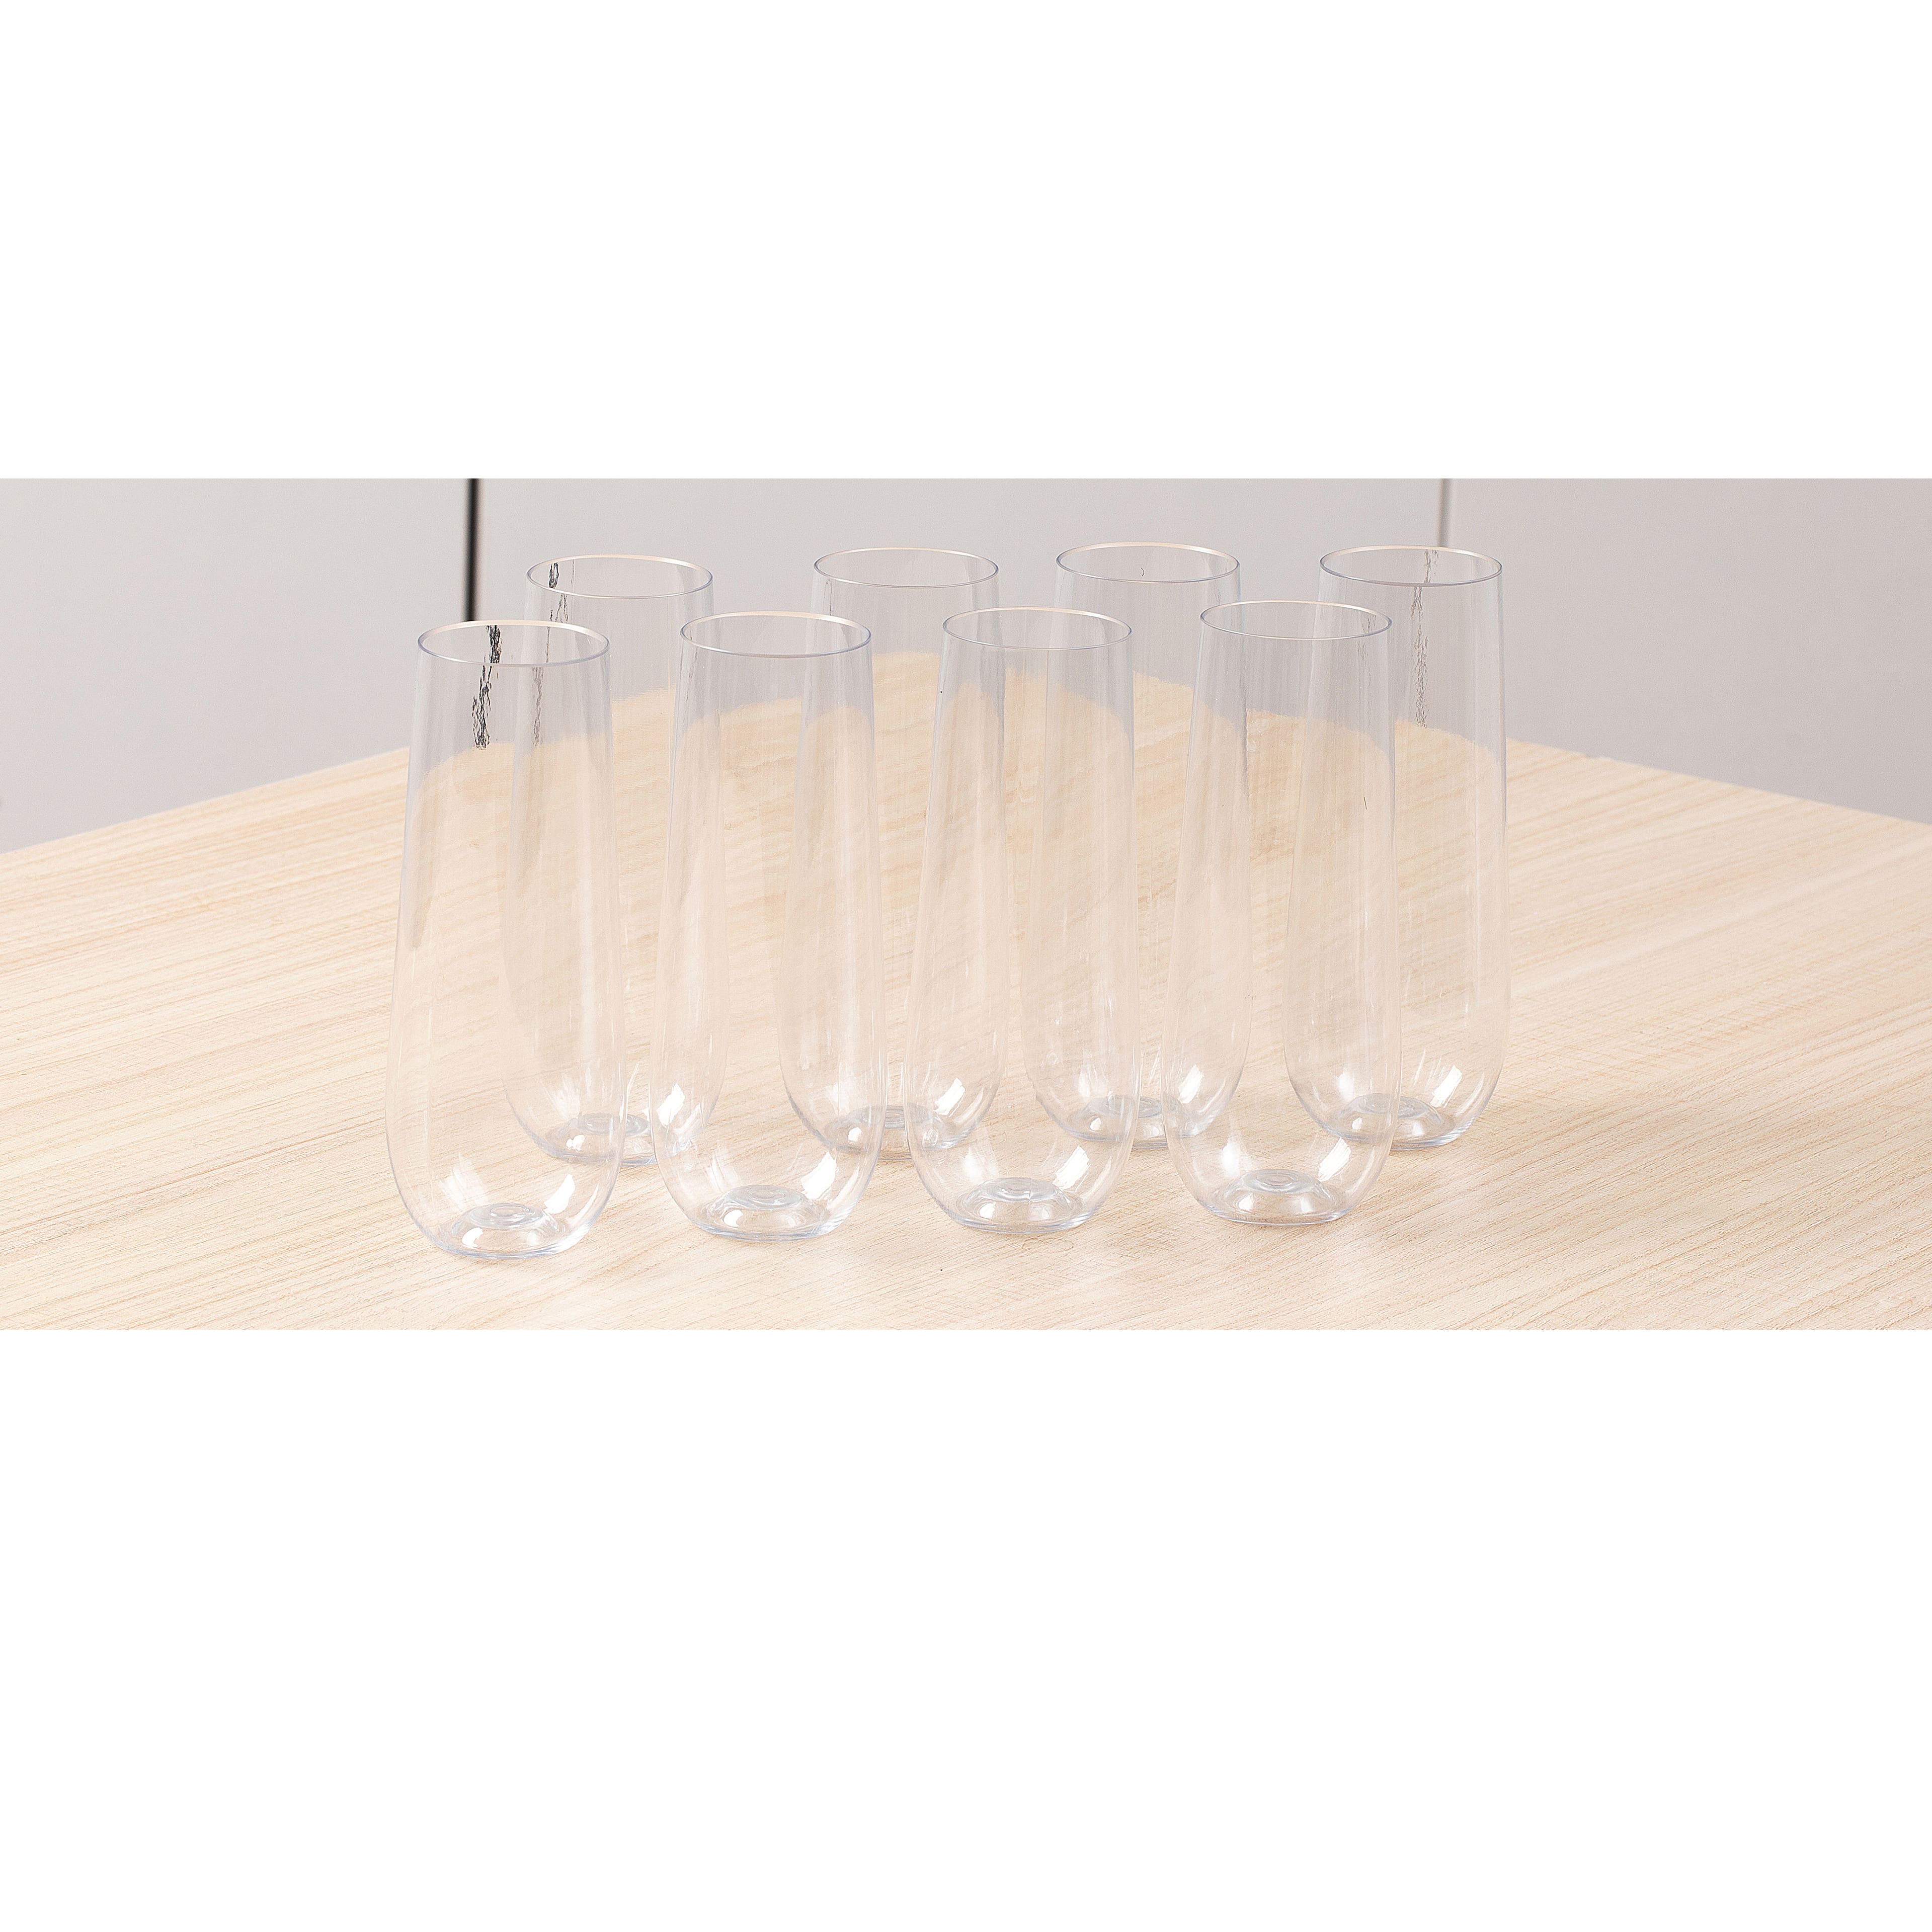 12 Packs: 8 ct. (96 total) 9oz. Clear Plastic Stemless Champagne Flutes by Celebrate It&#x2122;